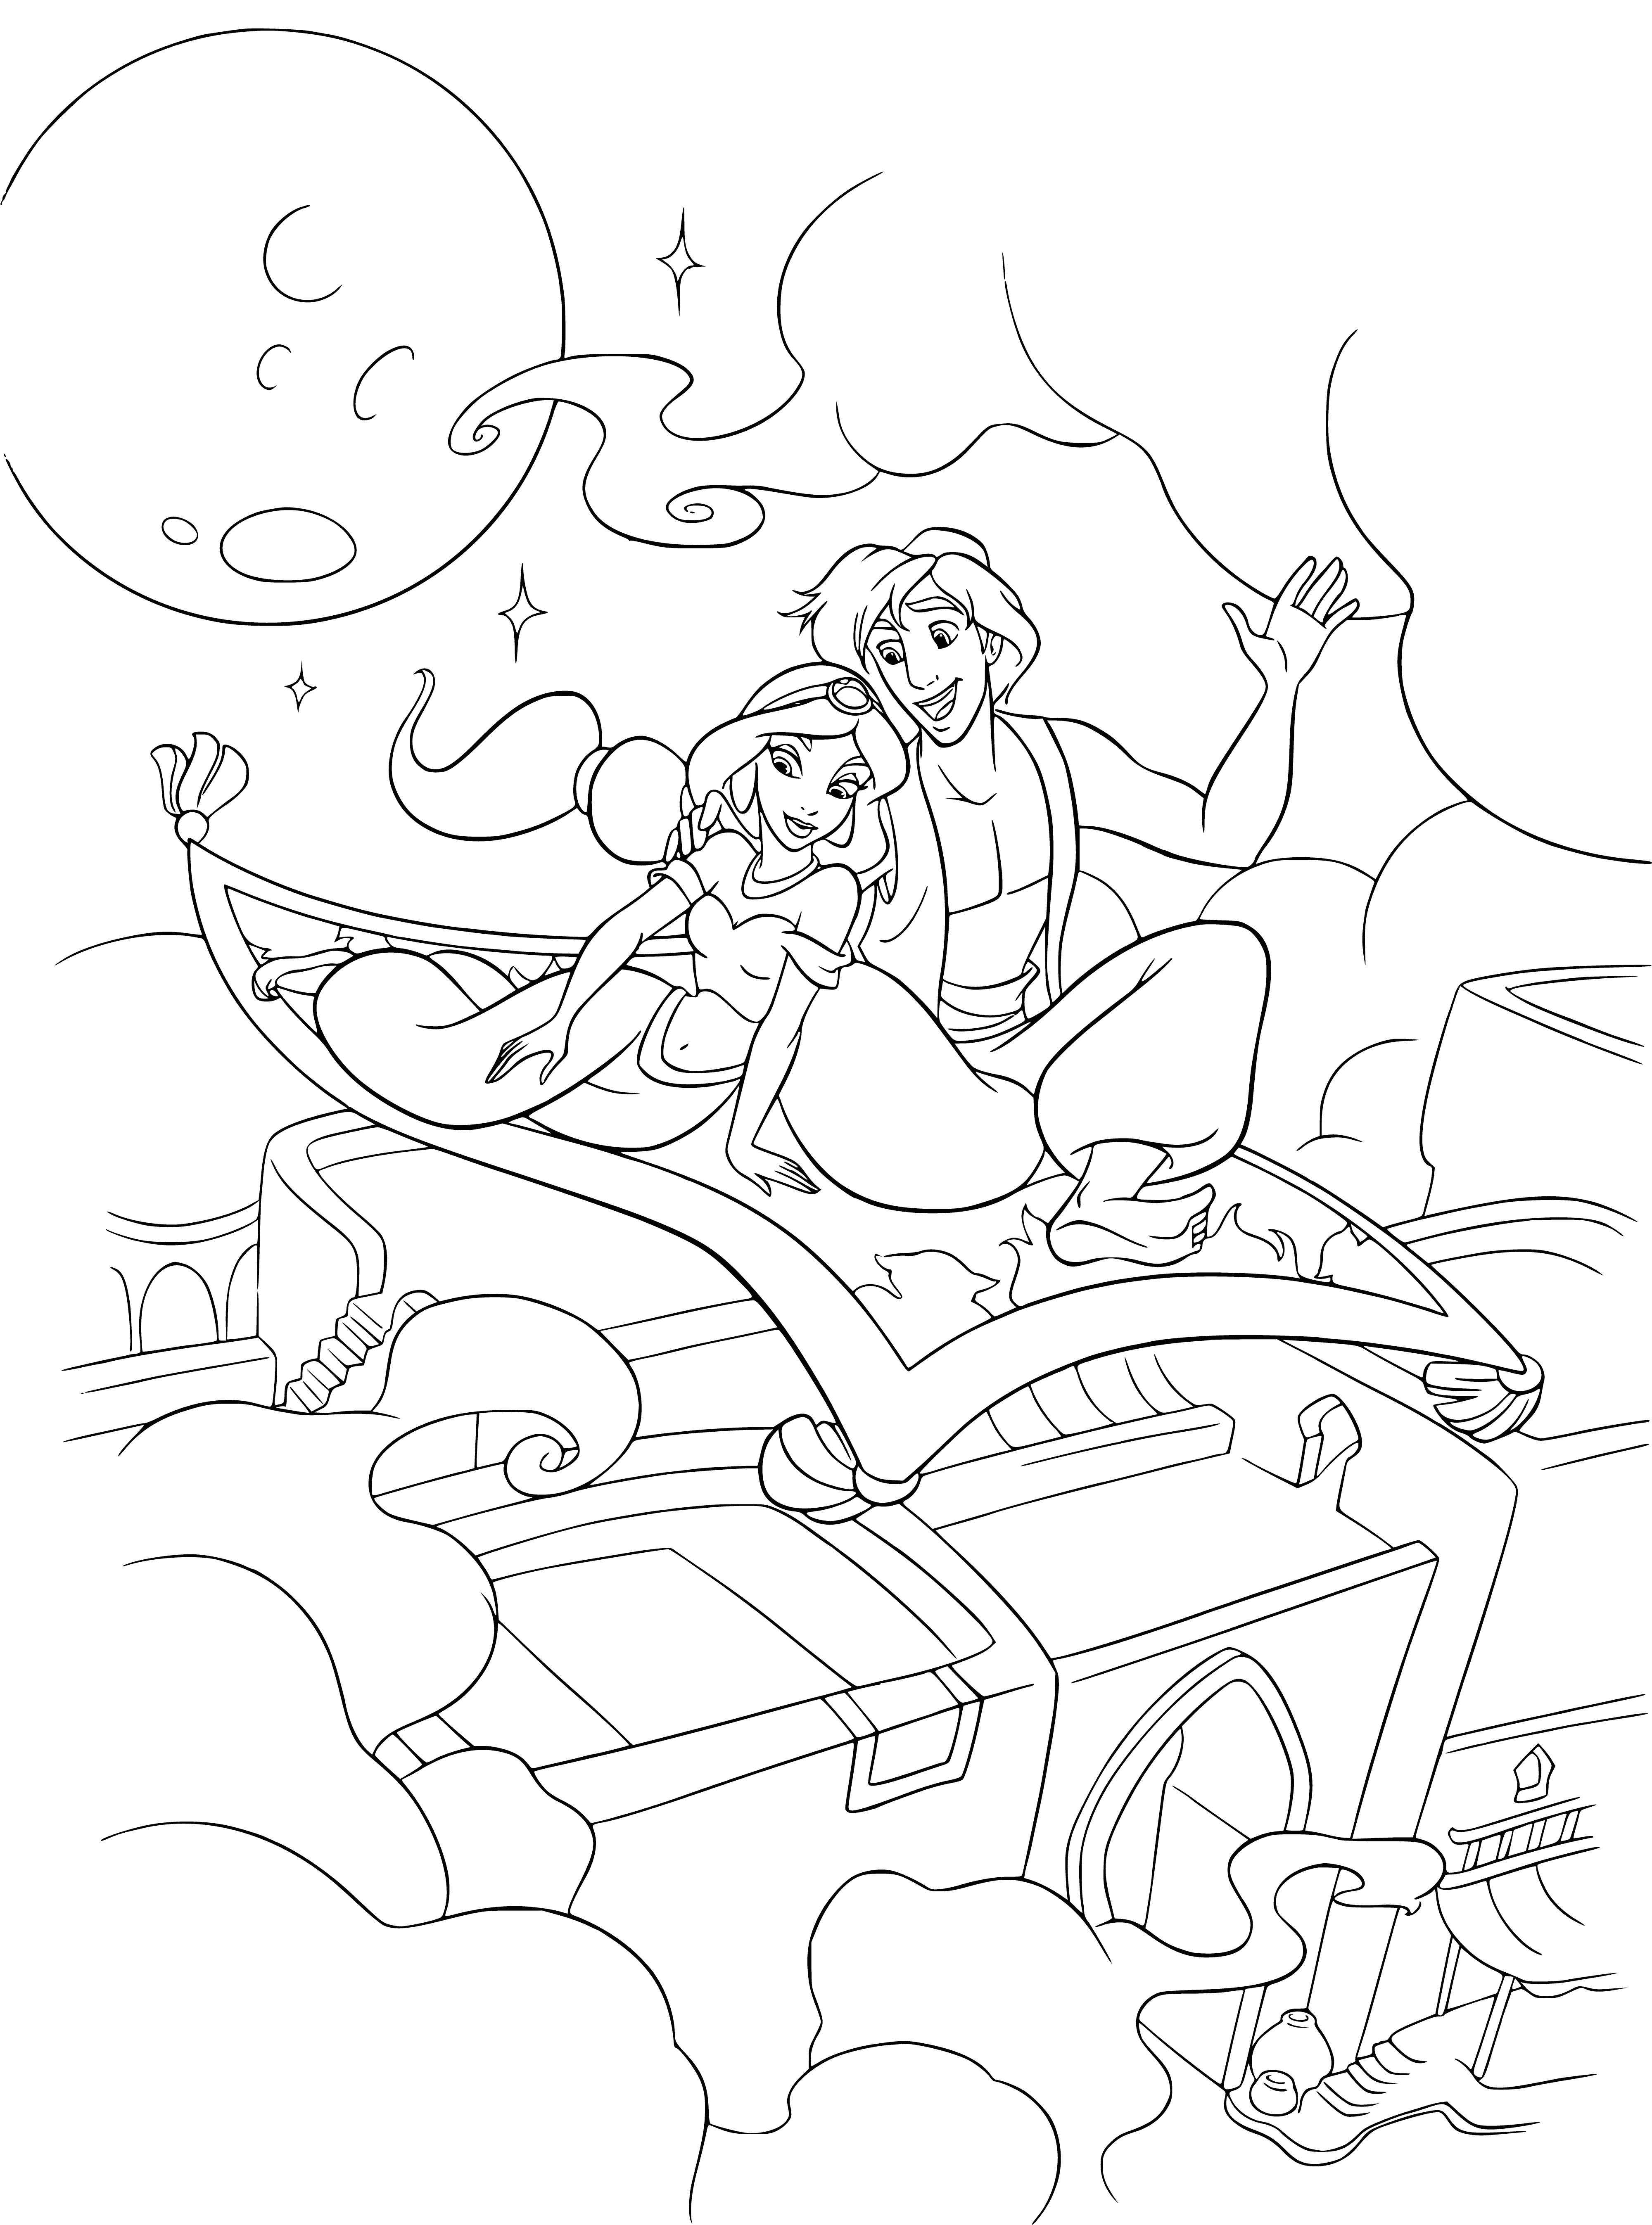 Flying over the city on a magic carpet coloring page